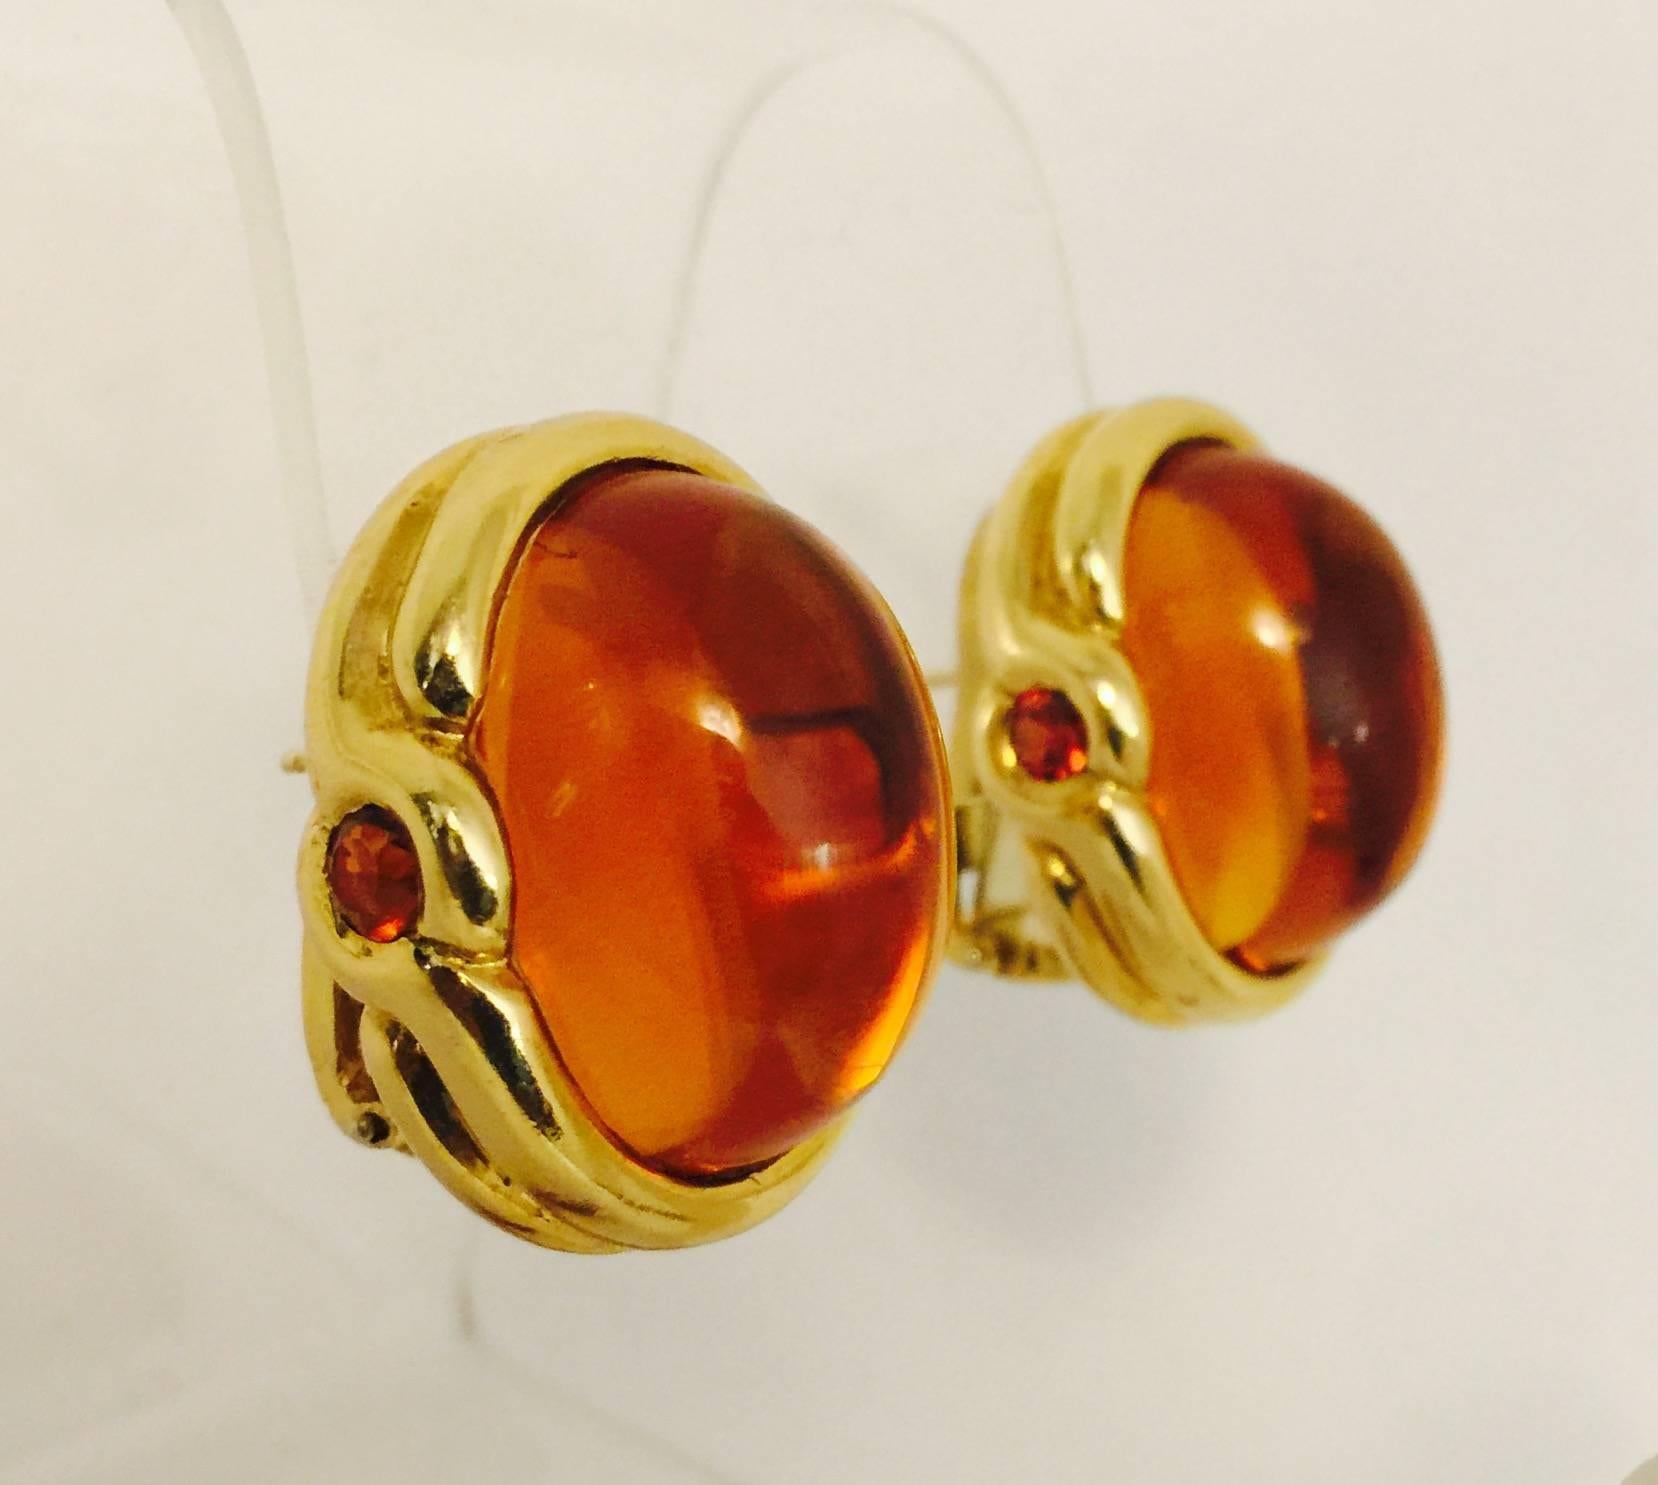 18K yellow gold frames cradle spectacular cabochon Palmeira Citrines the color of fine Cognac.  Visible on each side are bezel set, faceted orange Topaz.  Colors are stunning together! Omega back pierced earrings are easily converted to clip on. 